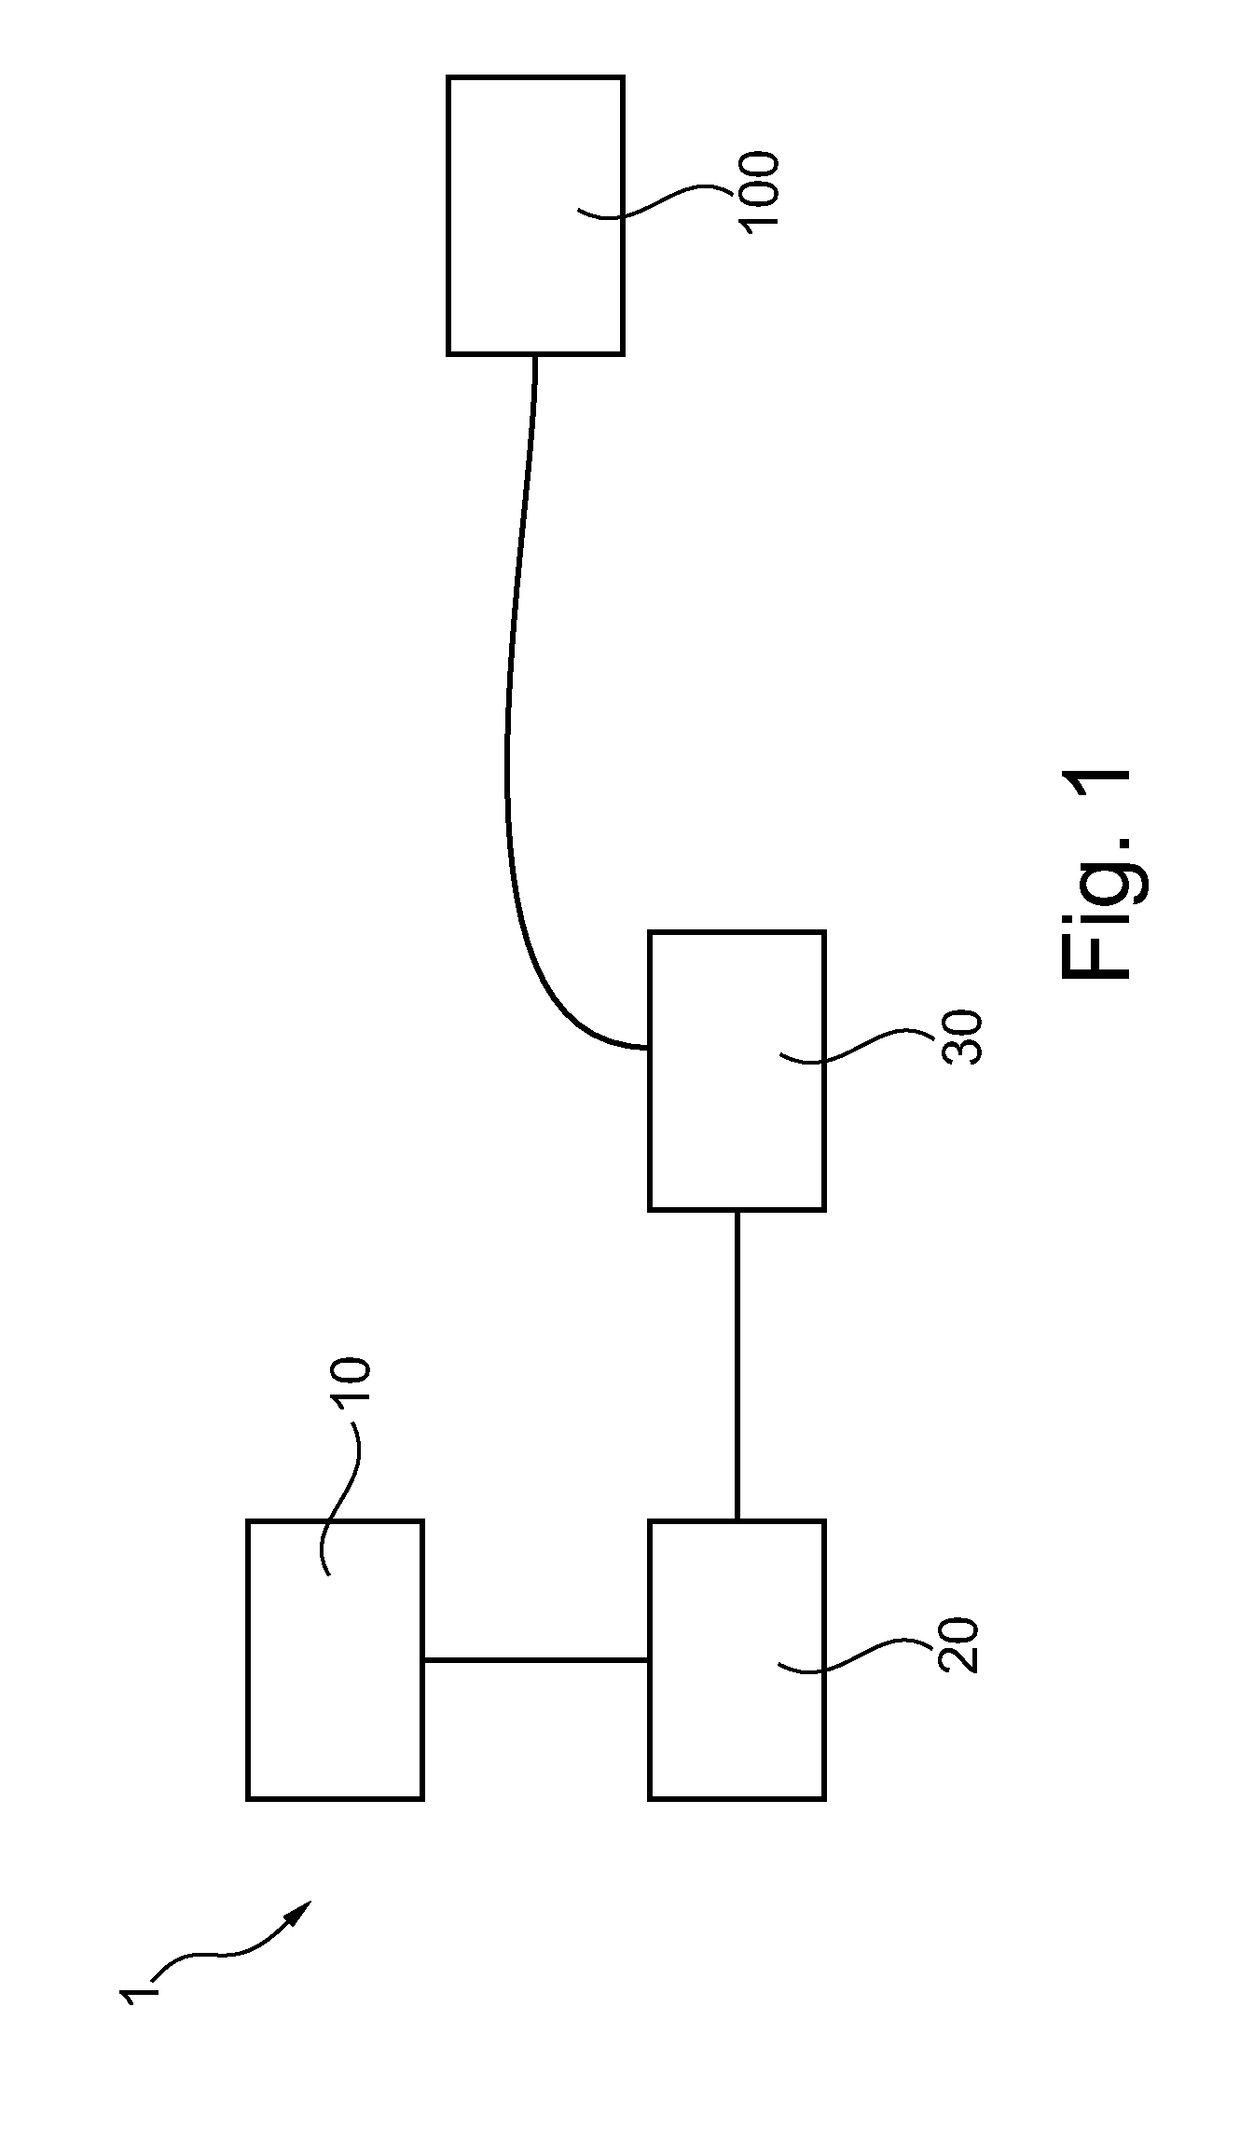 A shifter for controlling the transmission of a motor vehicle, and a method for controlling the transmission of a vehicle with a shifter